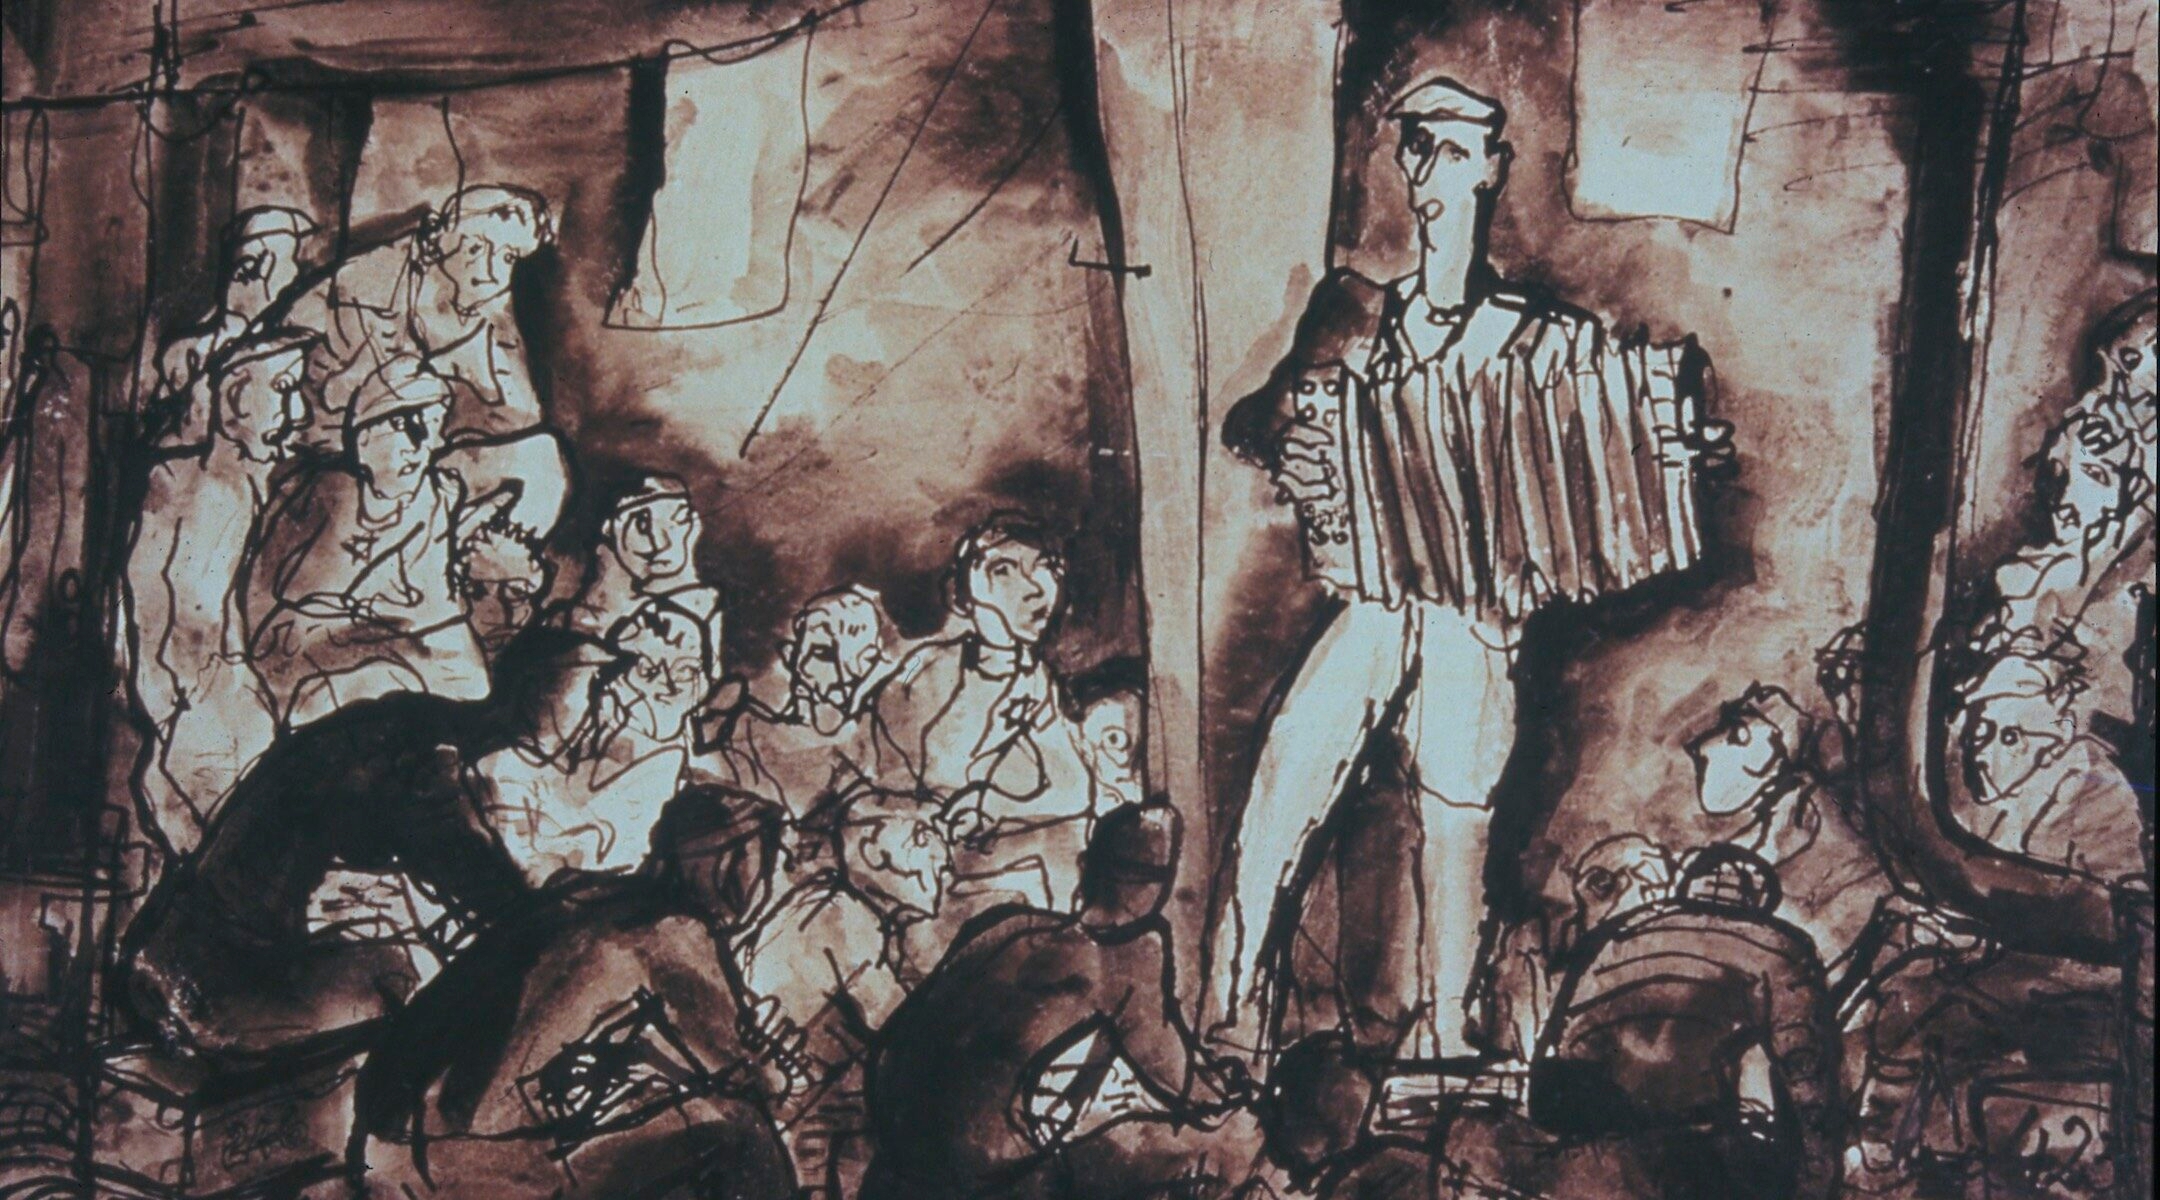 A drawing of musicians